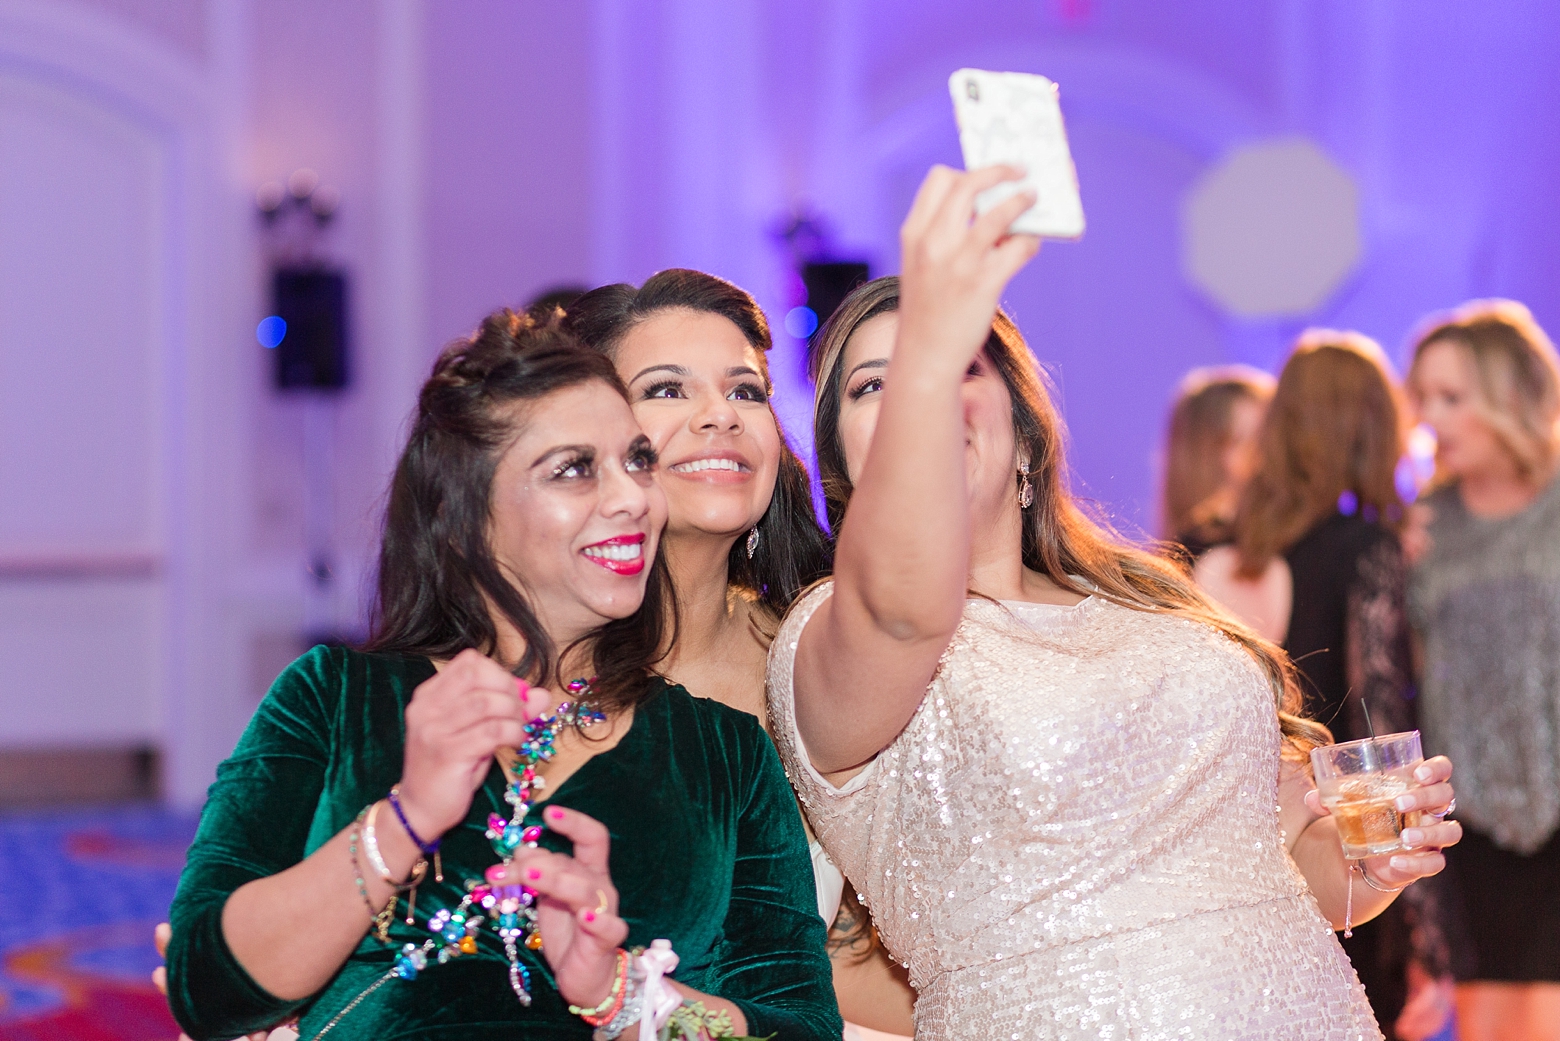 Renaissance Portsmouth-Norfolk Waterfront Hotel Wedding by Angie McPherson Photography